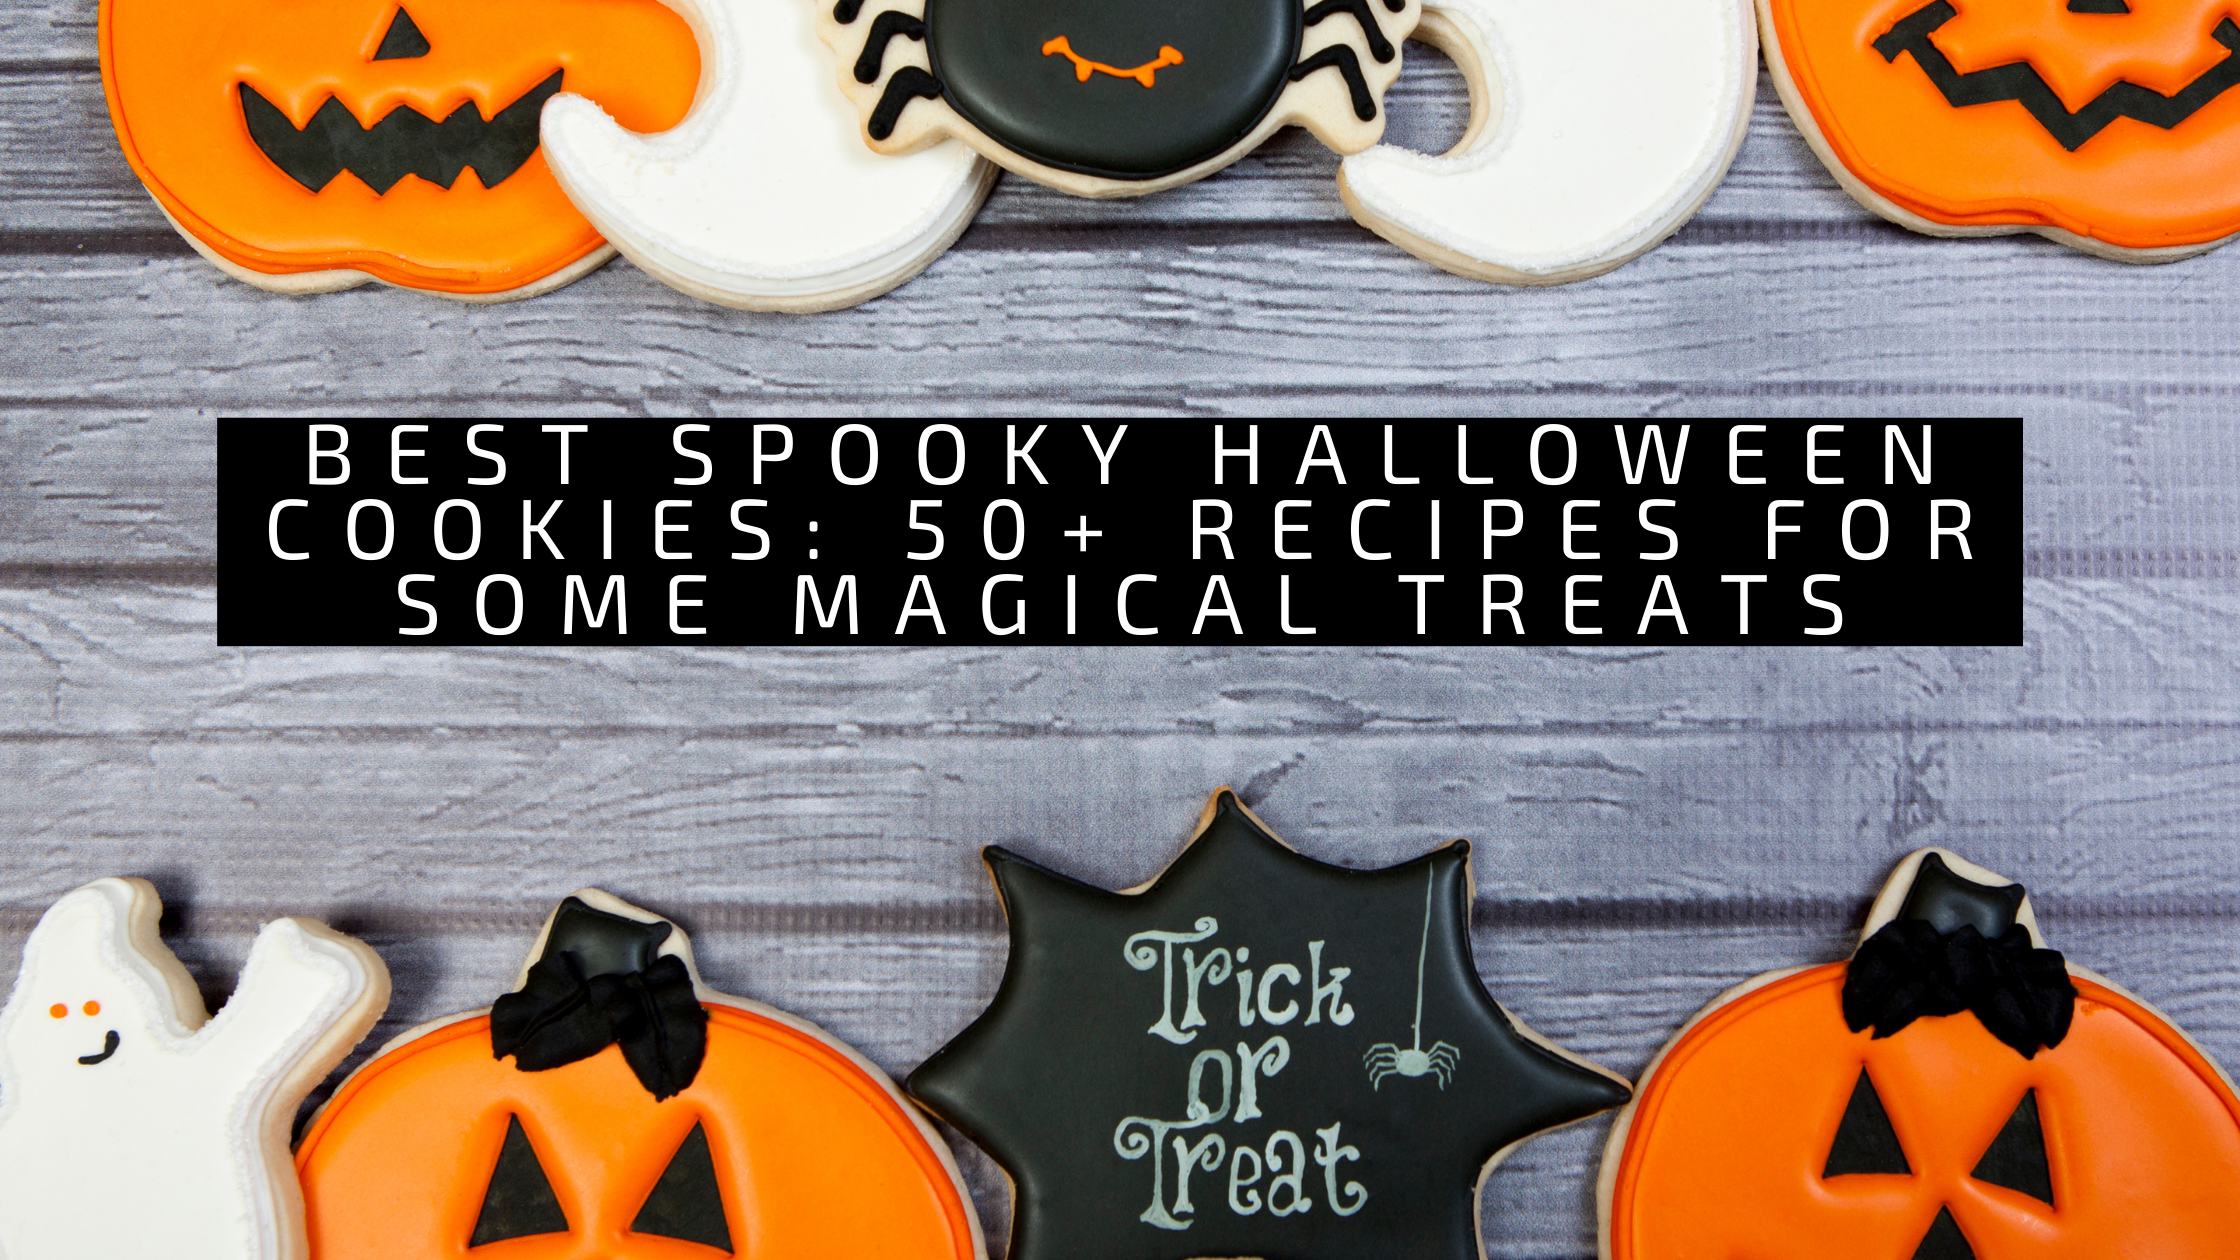 Best Spooky Halloween Cookies: 50+ Recipes for Some Magical Treats 4